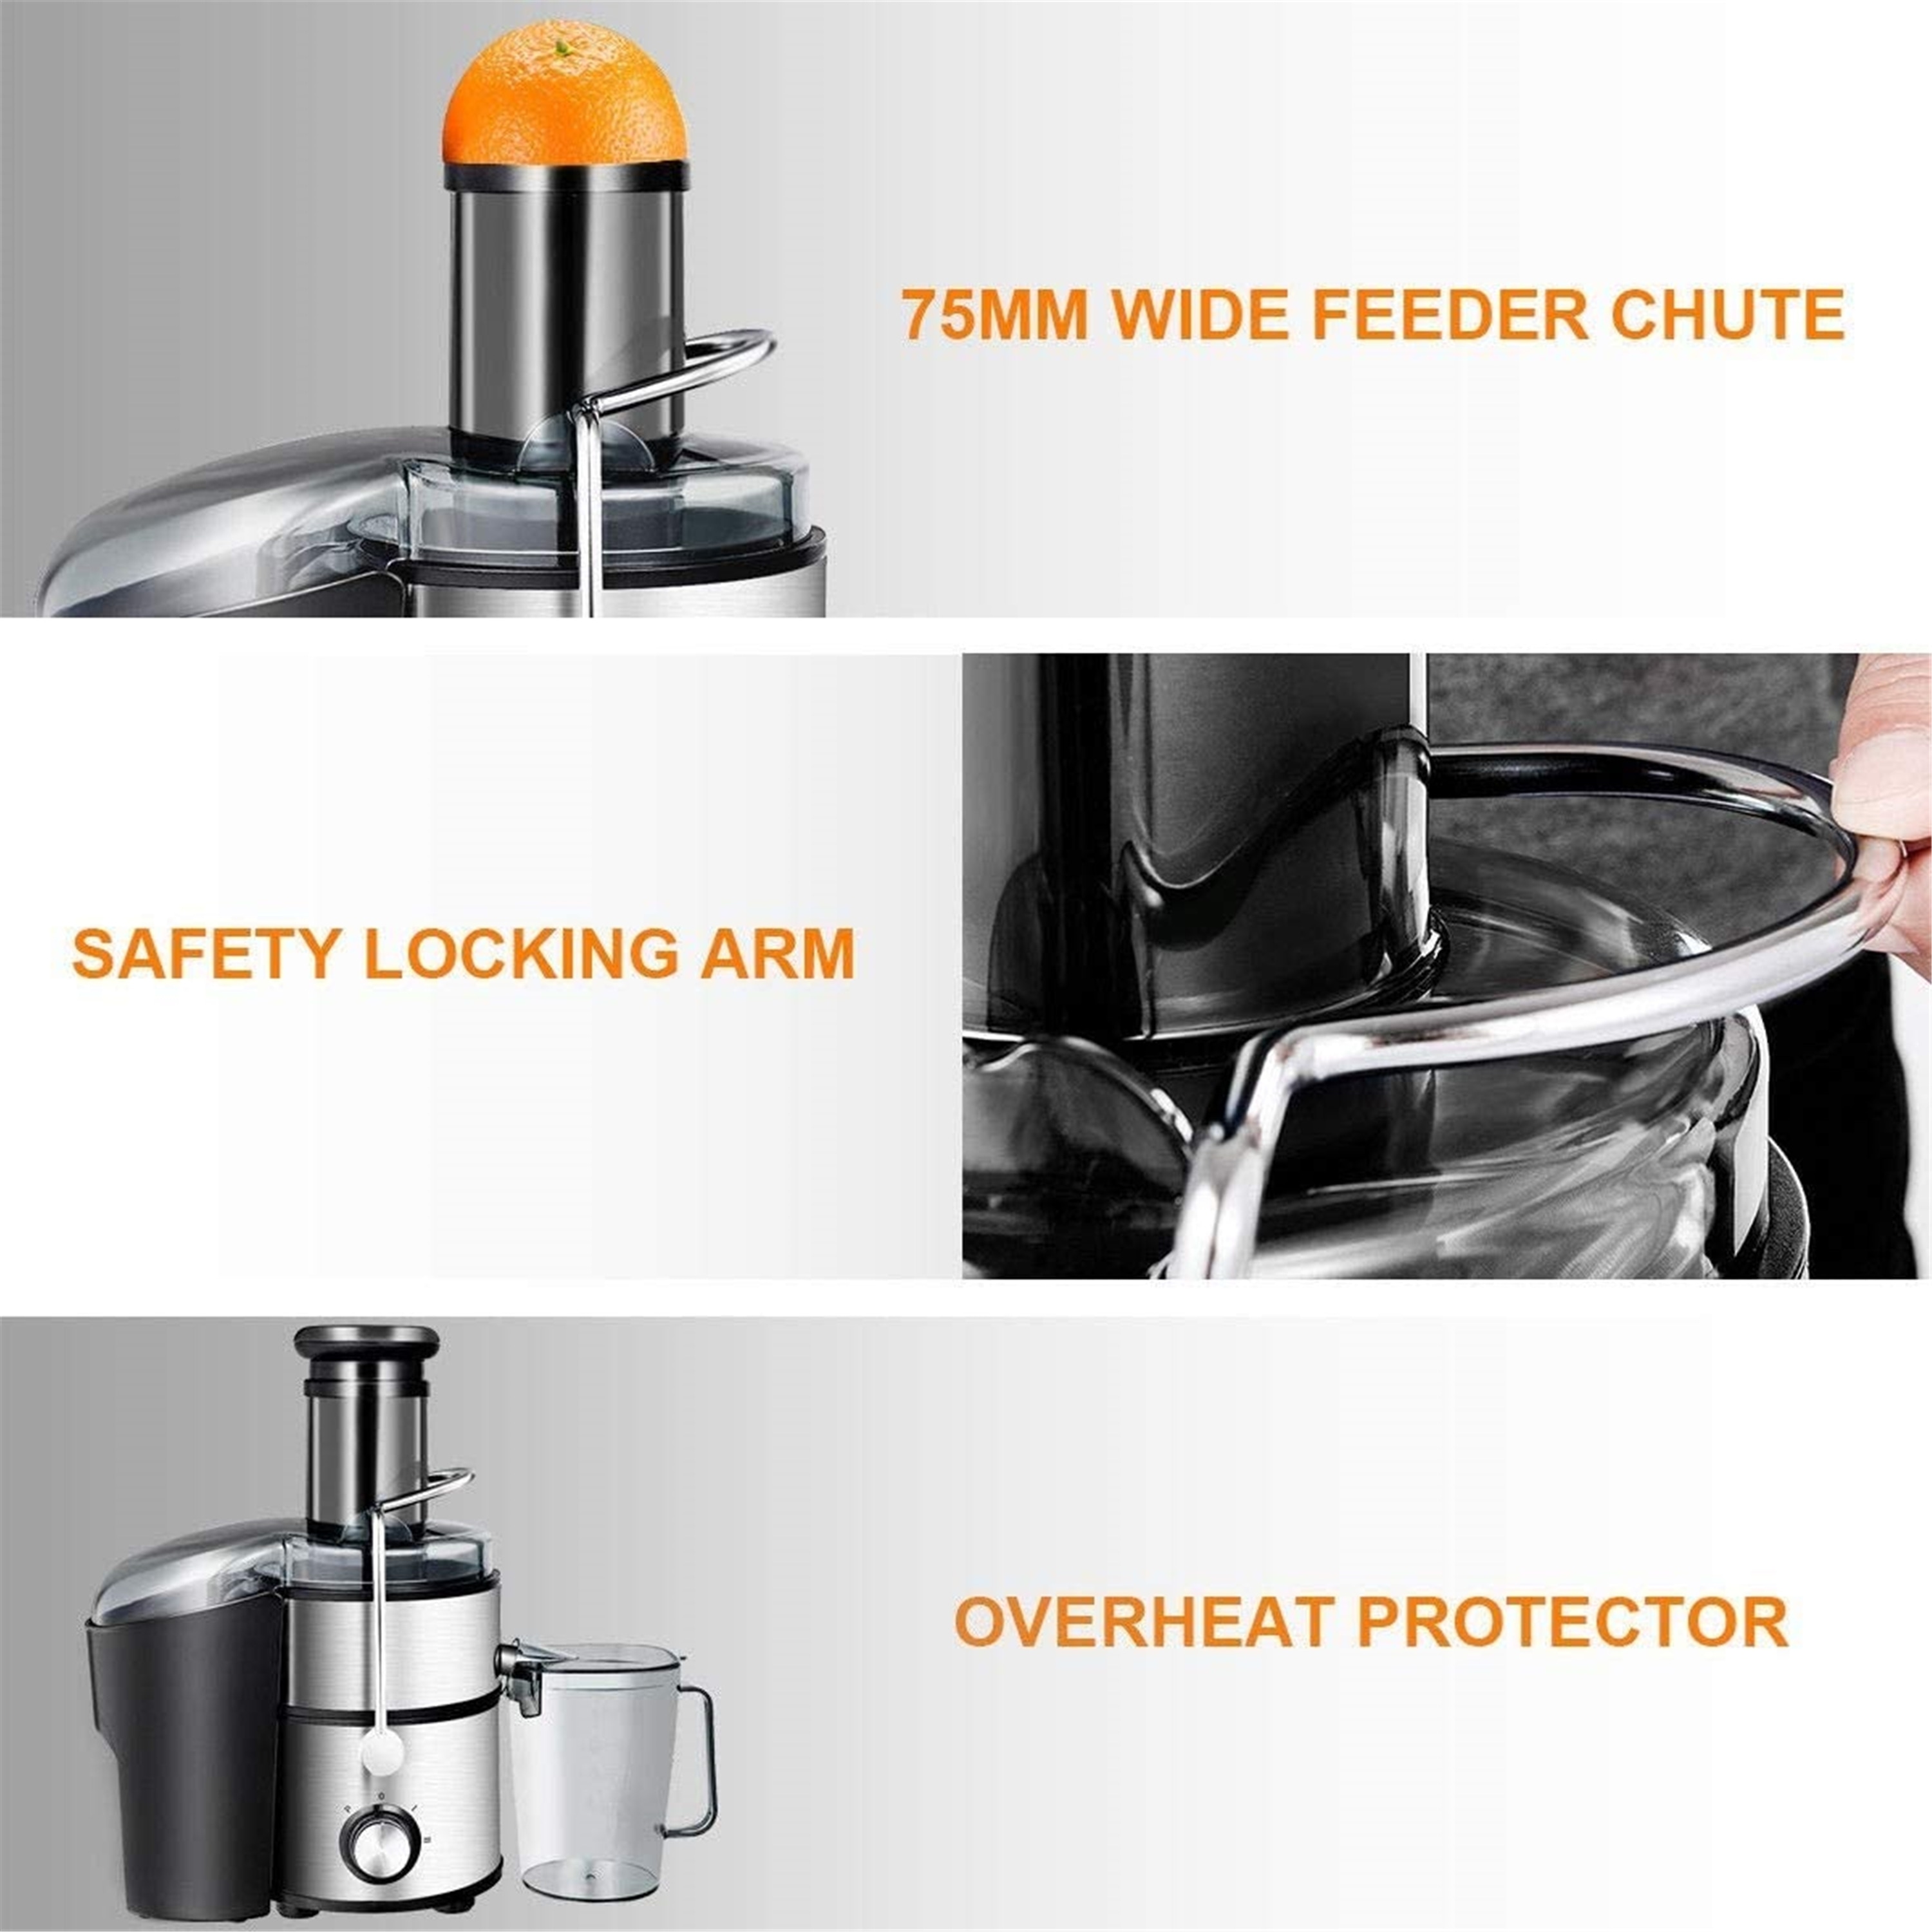 https://ak1.ostkcdn.com/images/products/is/images/direct/235aca03763a531e08e37cea23a30d2abde26d90/Home-Kitchen-5-in-1-Multi-Function-Juice-Extractor-Blender-Grinder-Chopper-Food-Processor.jpg